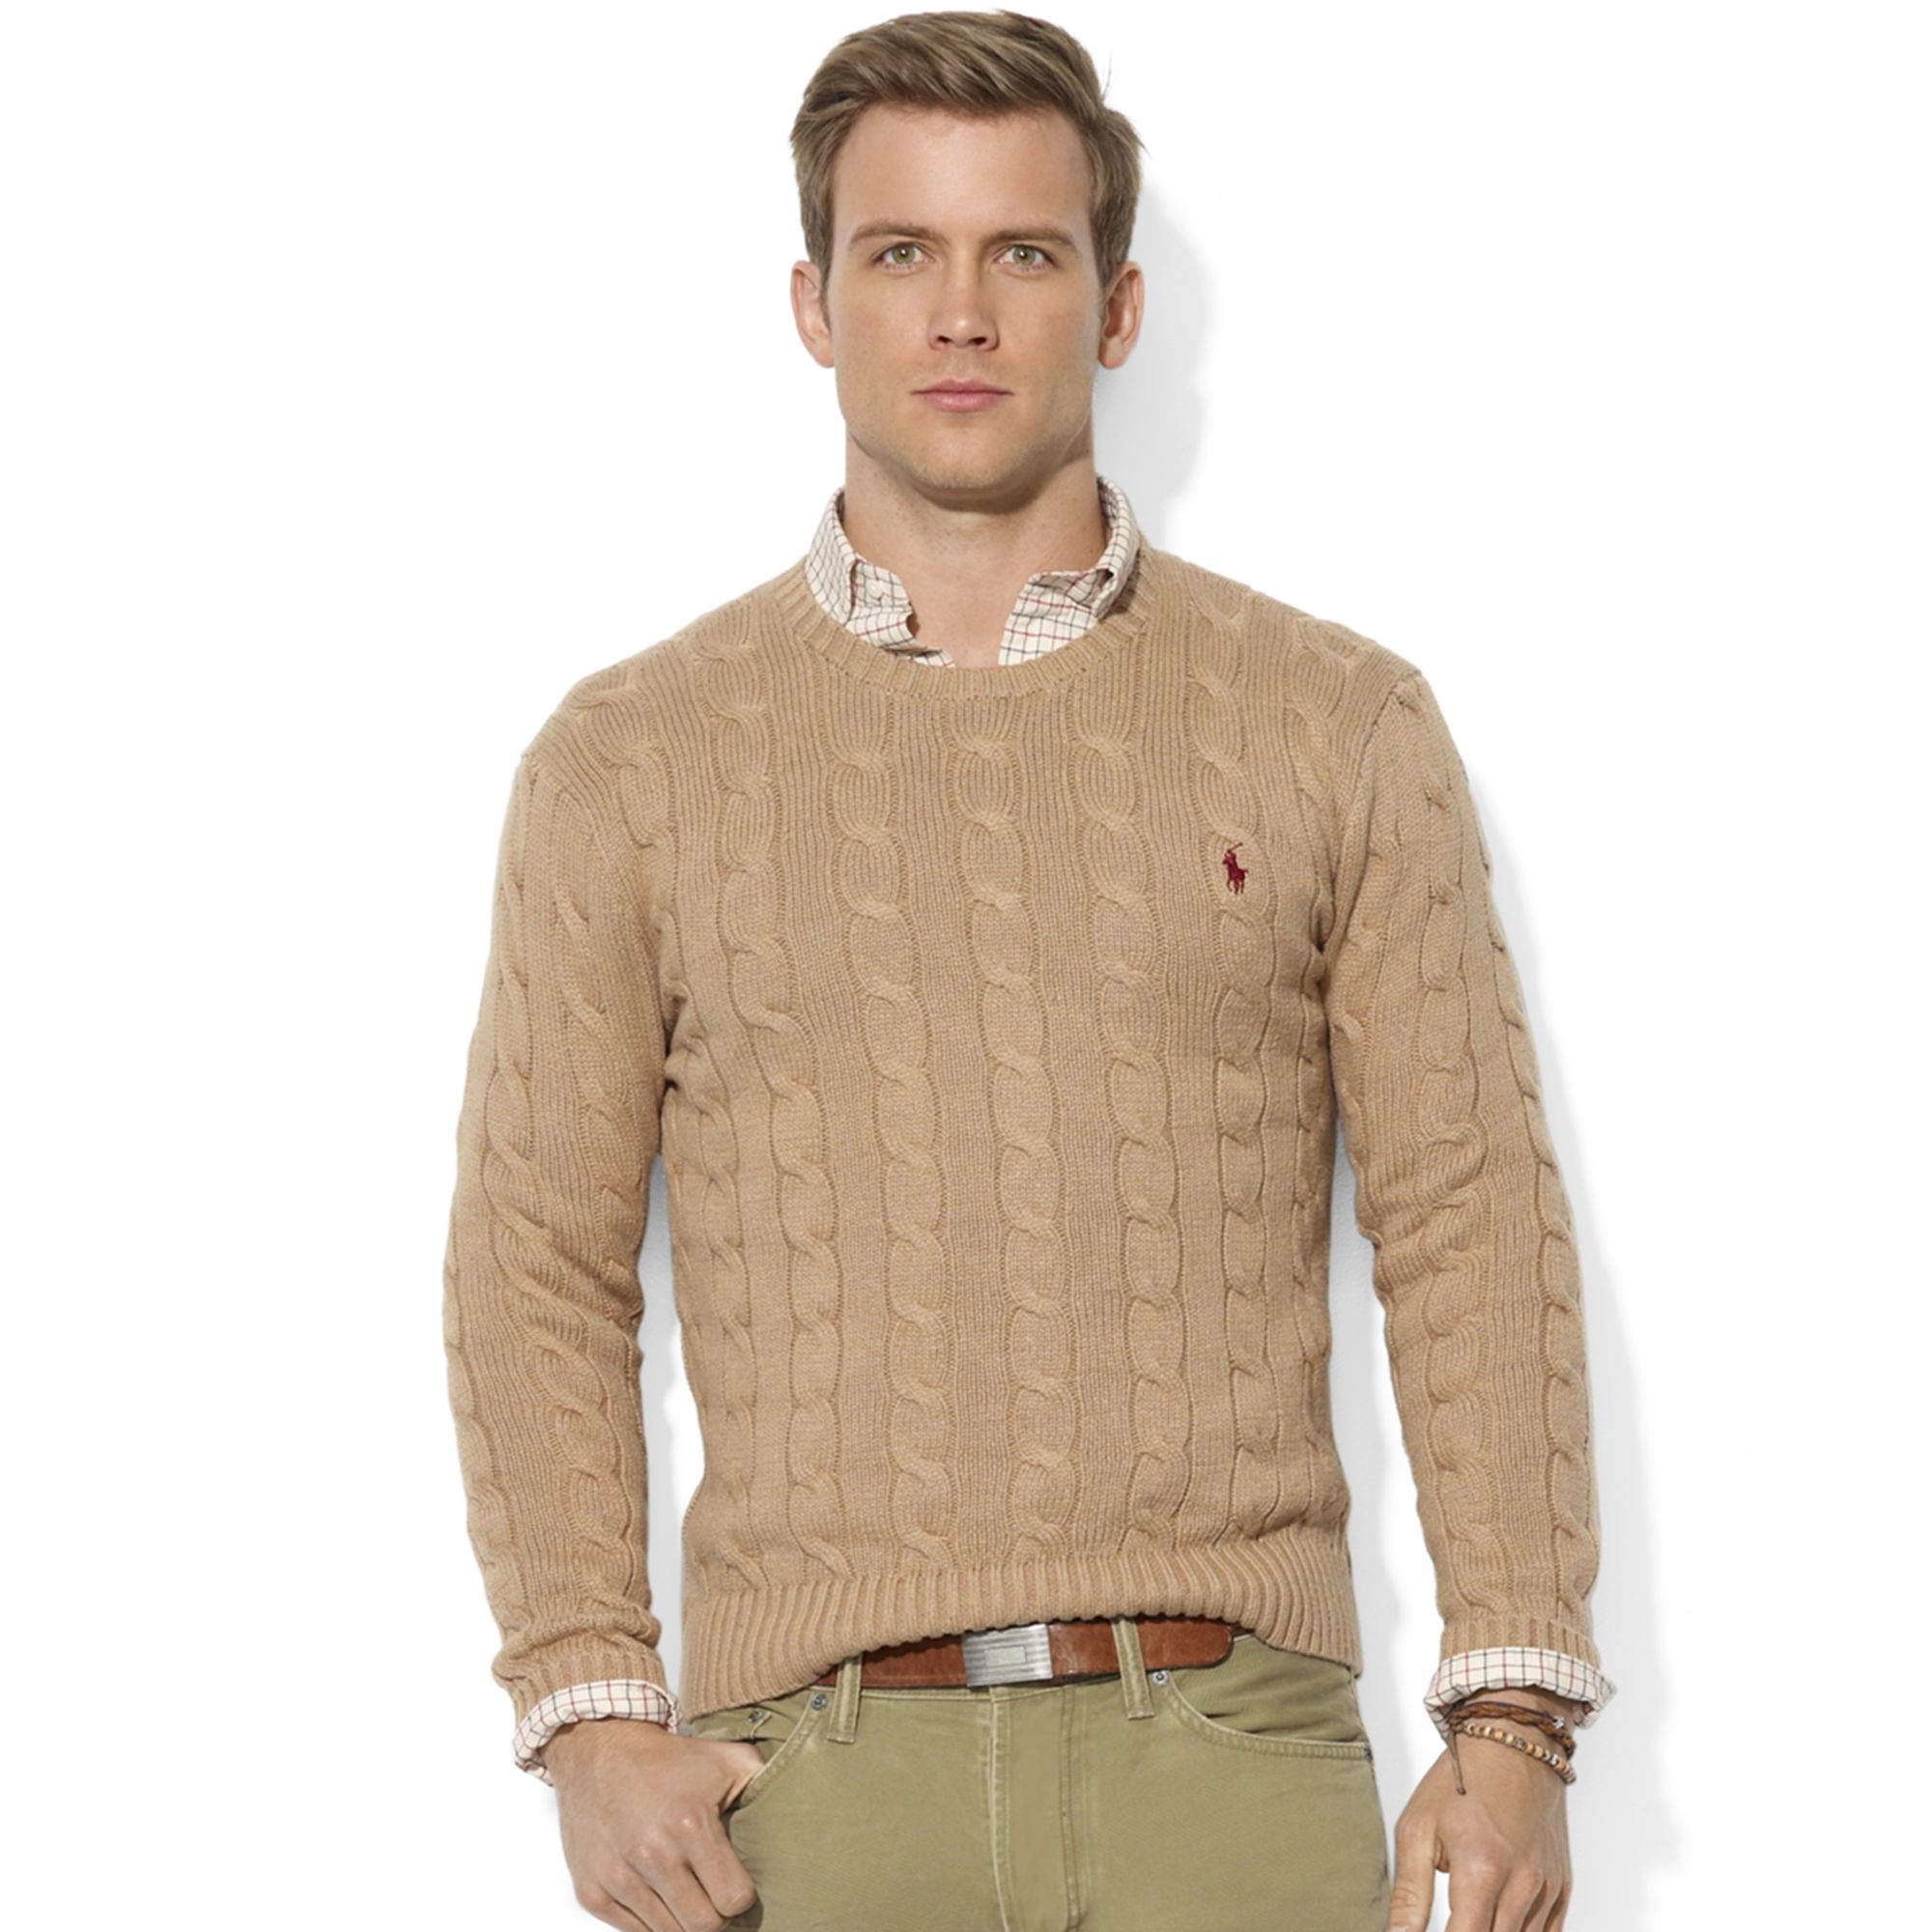 Ralph Lauren Roving Crew Neck Cable Cotton Sweater in Natural for Men - Lyst